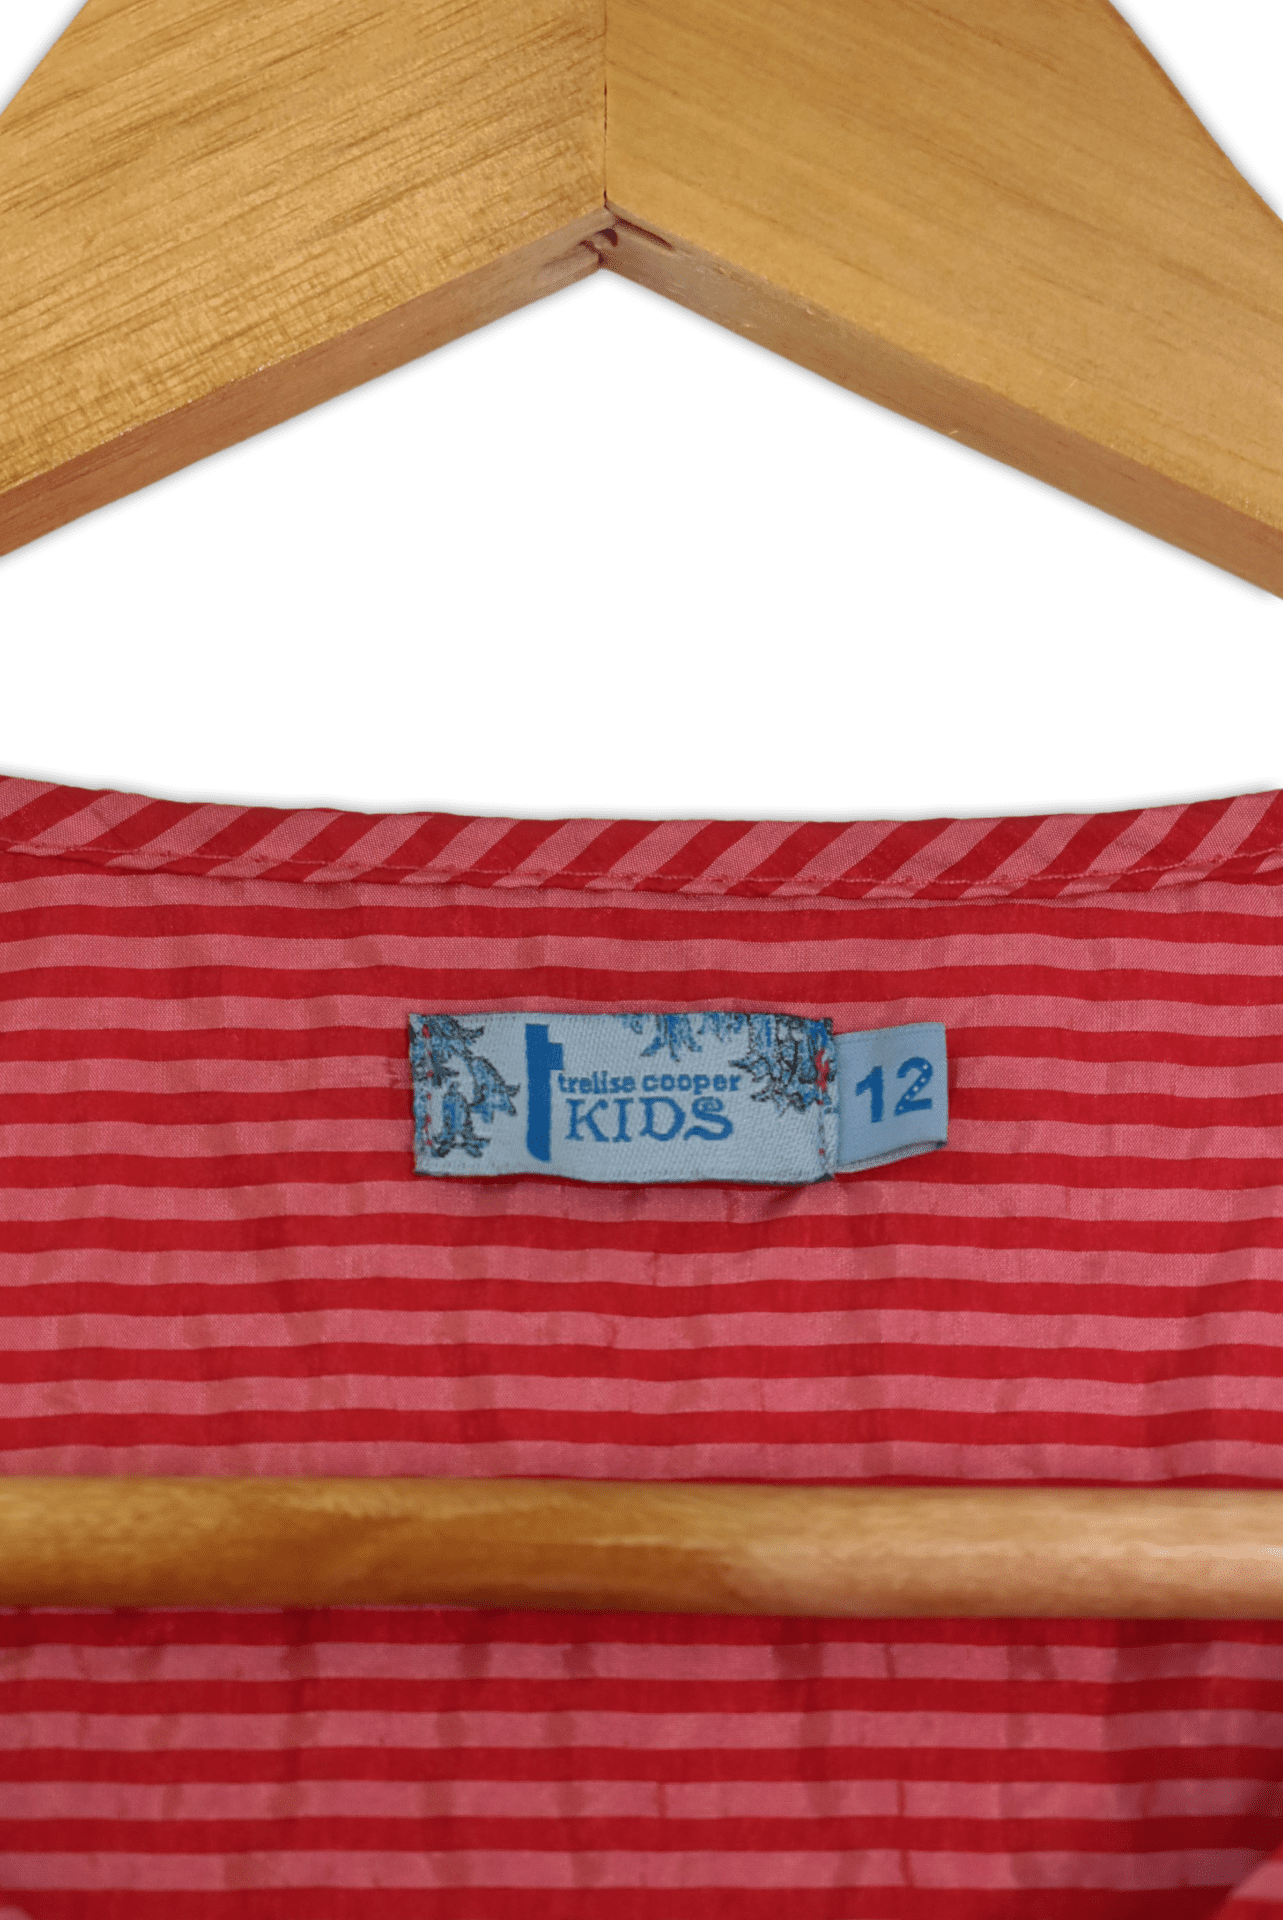 Long Sleeve Kids Top in a size 12. Candy red stripes, featuring a small v neck, ruffle detailing on the front with ruffled cuffs.